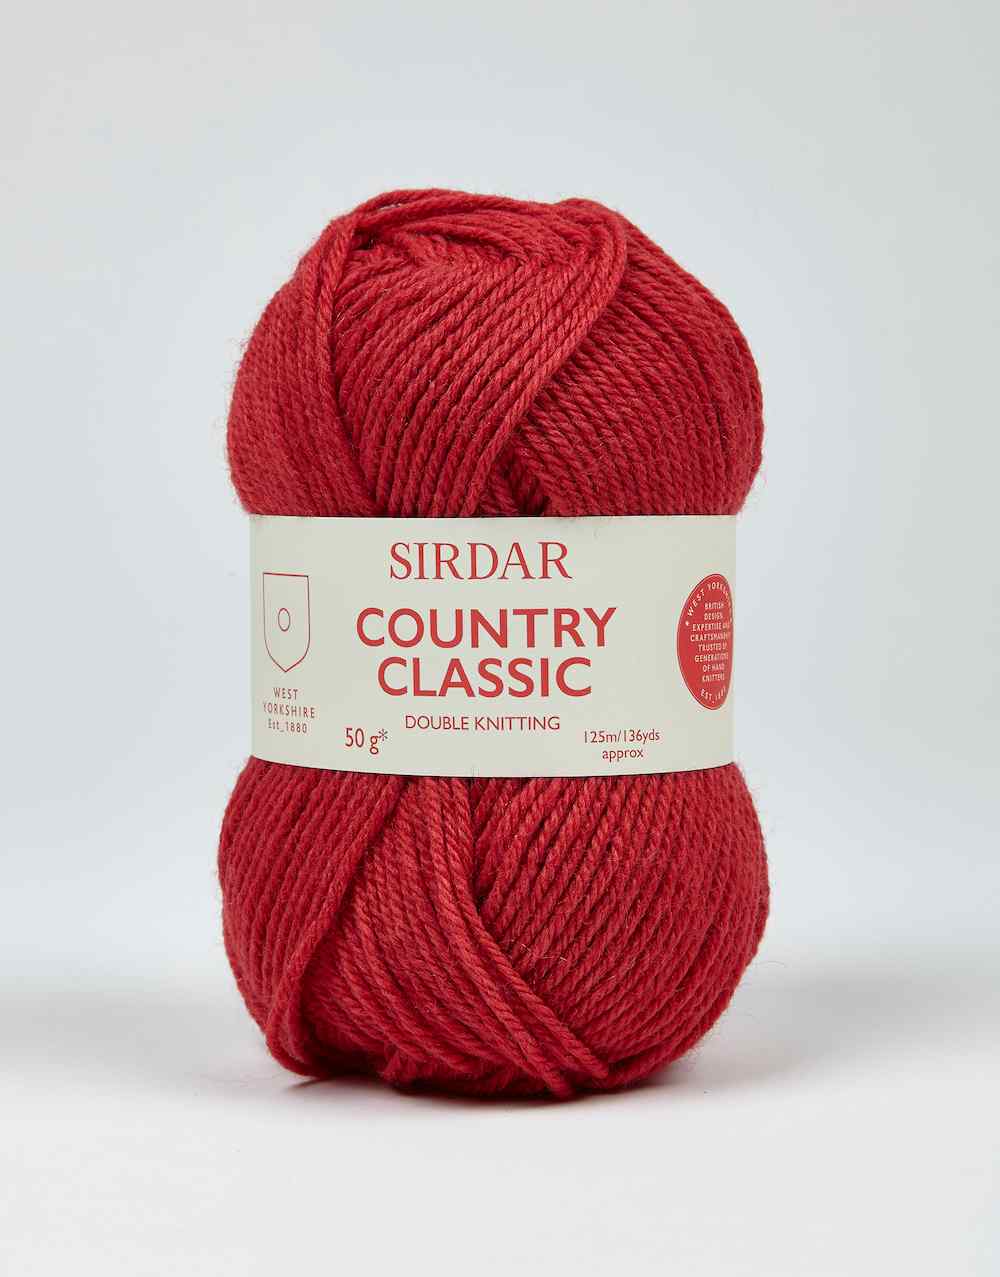 Sirdar Country Classic DK 0870 Cherry Red